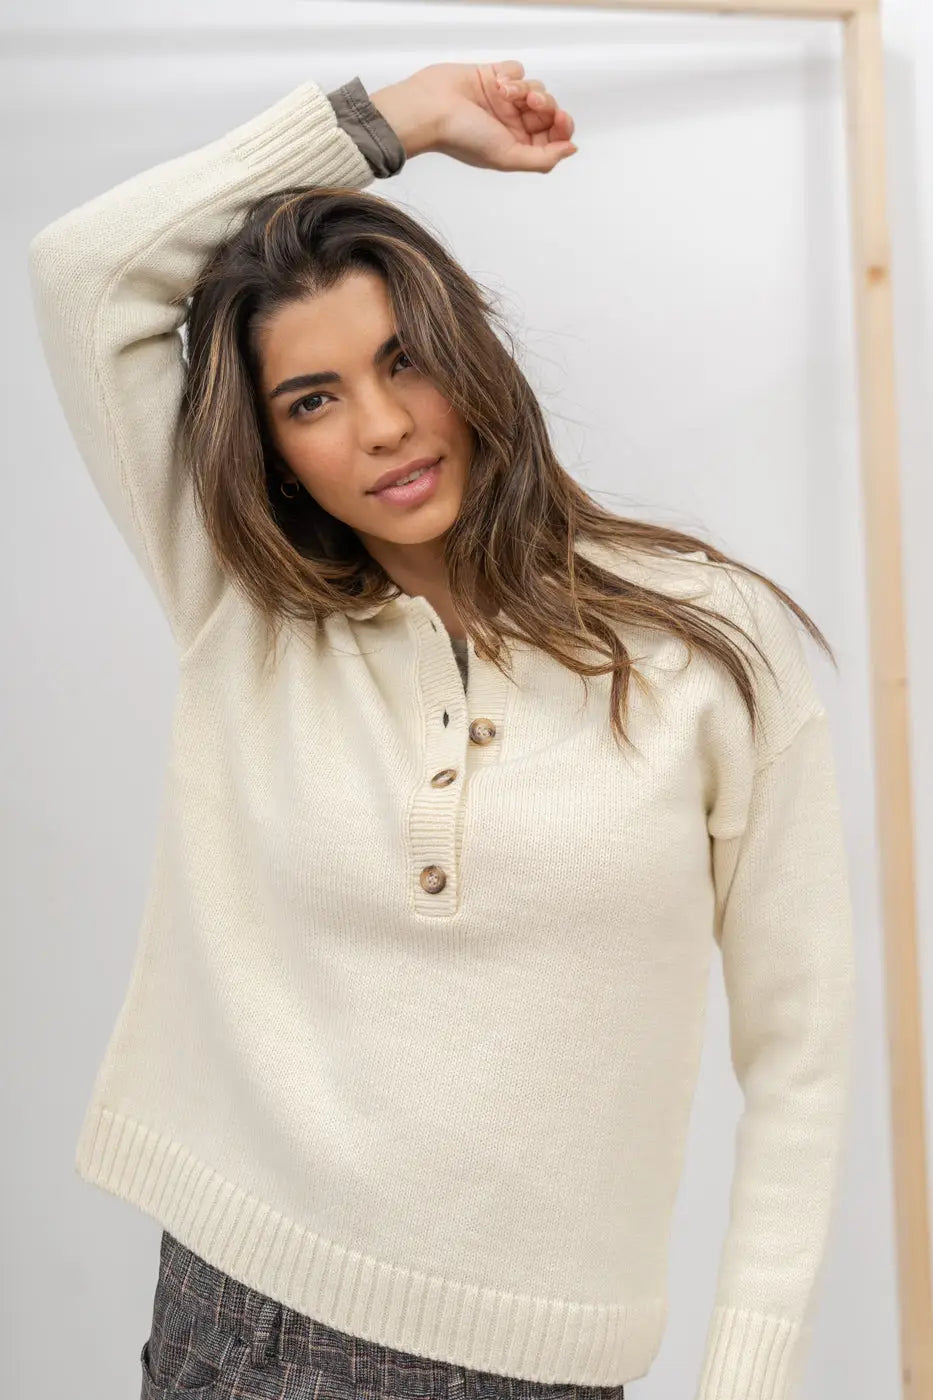 curate, poems bcn, barcelona womens apparel brand, beige ivory polo sweater, womens polo sweater, womens knitwear, beige lightweight sweater, half-button pullover sweater, sustainable and ethically made womens fashion and apparel